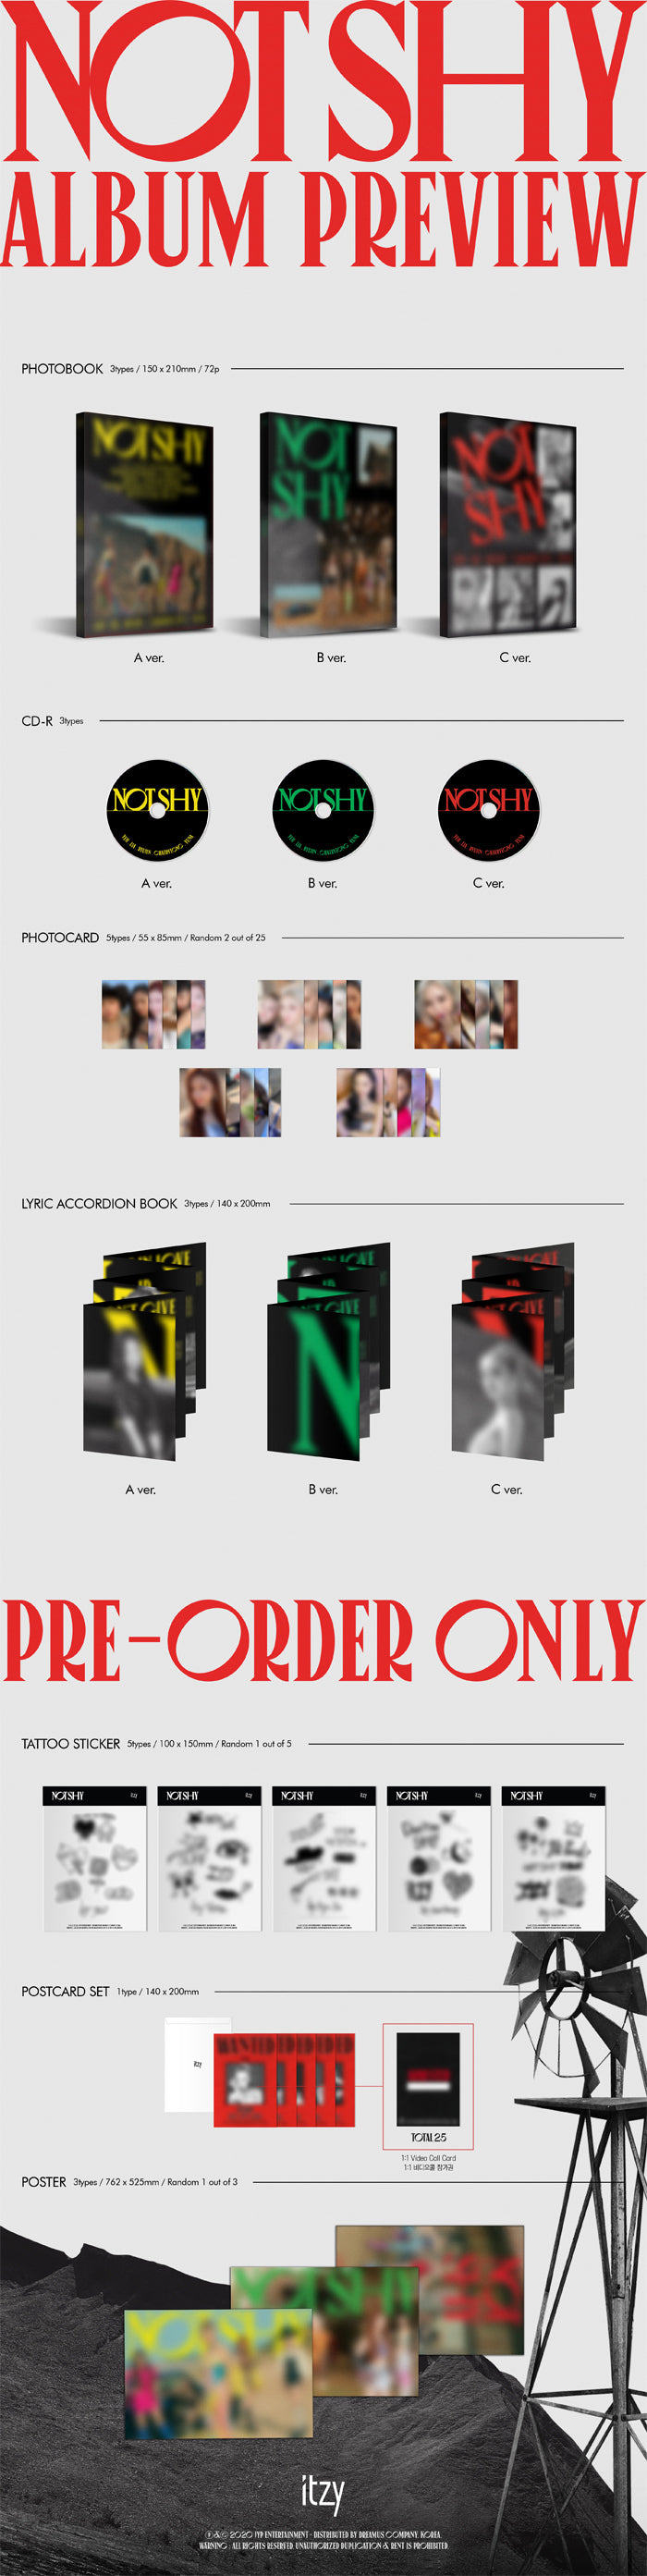 1 CD
1 Photo Book (72 pages)
2 Photo Cards (random out of 25 types)
1 Lyric Accordion Book